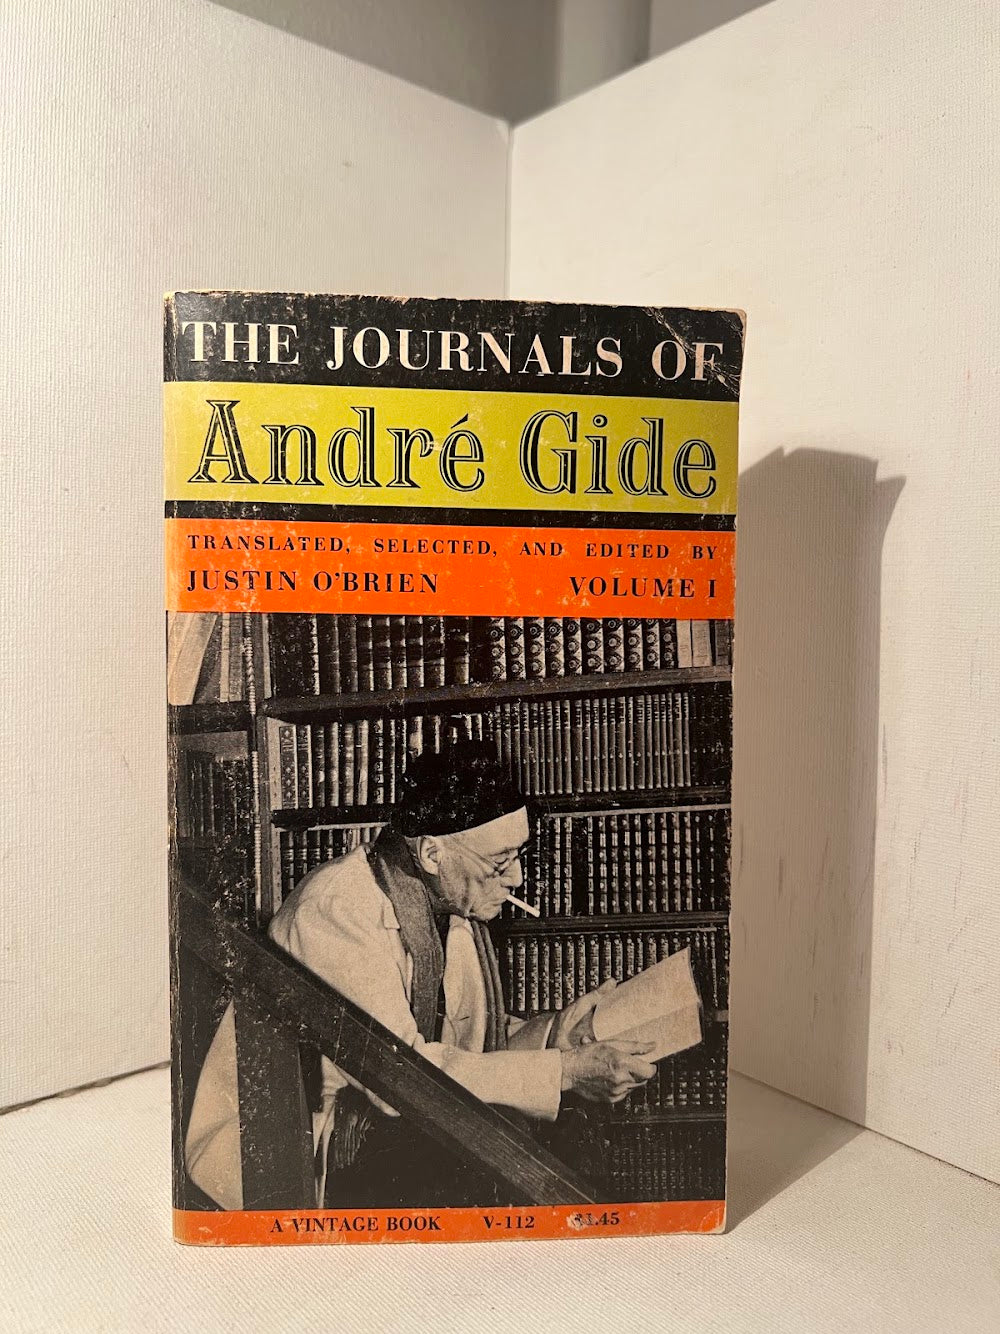 The Journals of Andre Gide Vol. 1